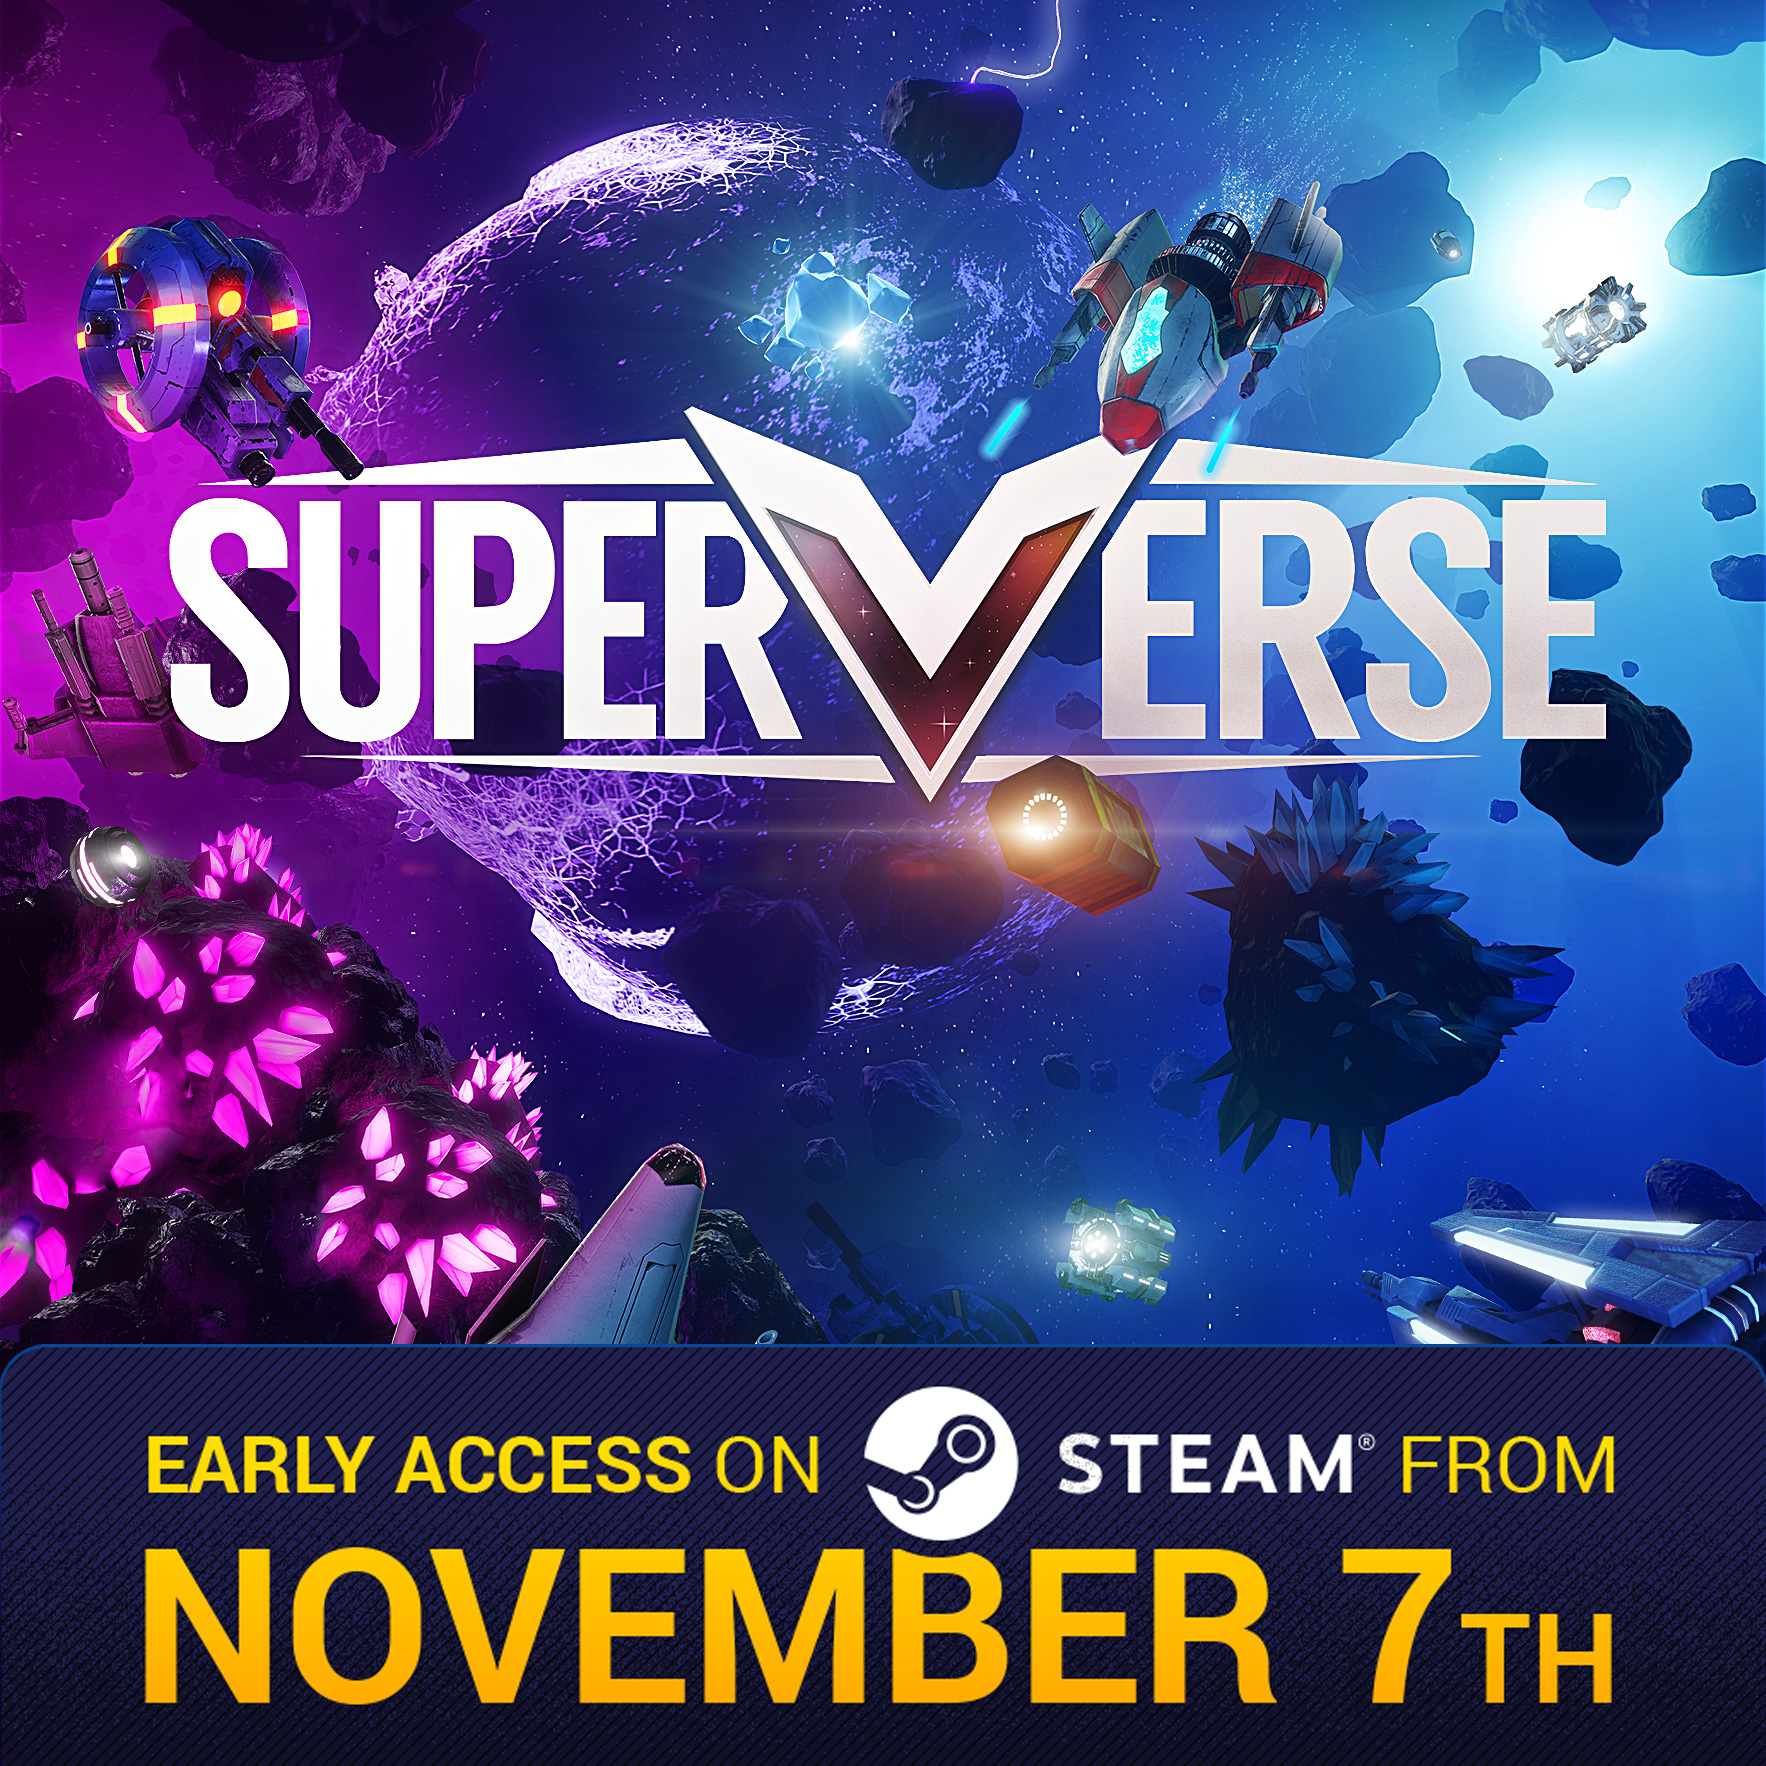 Early Access from November 7th